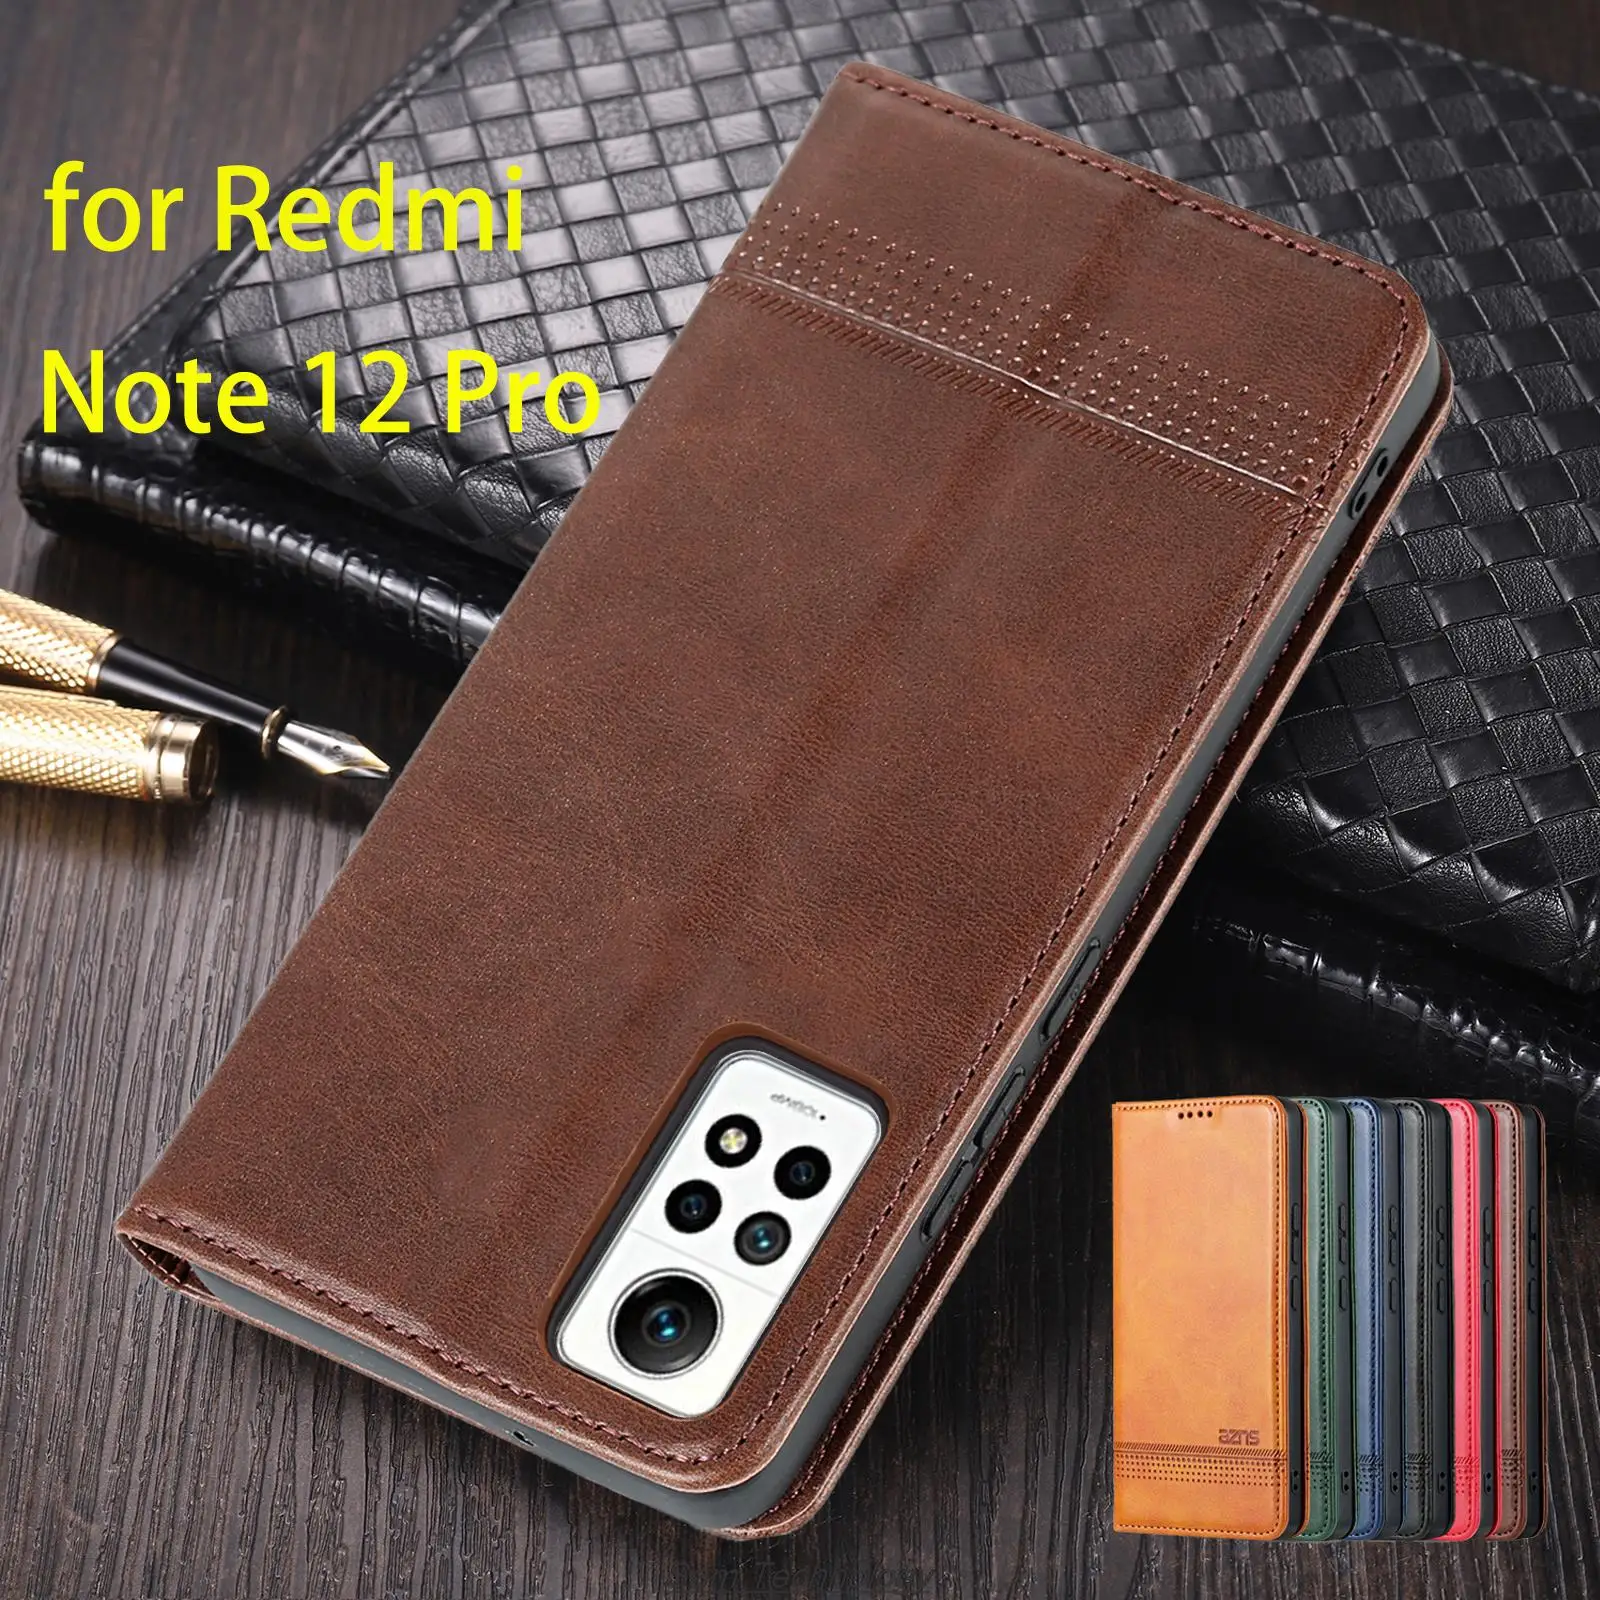 Magnetic Adsorption Leather Fitted Case for Xiaomi Redmi Note 12 Pro (4G  Global Rus EUR) Flip Cover Protective Case Fundas Coque